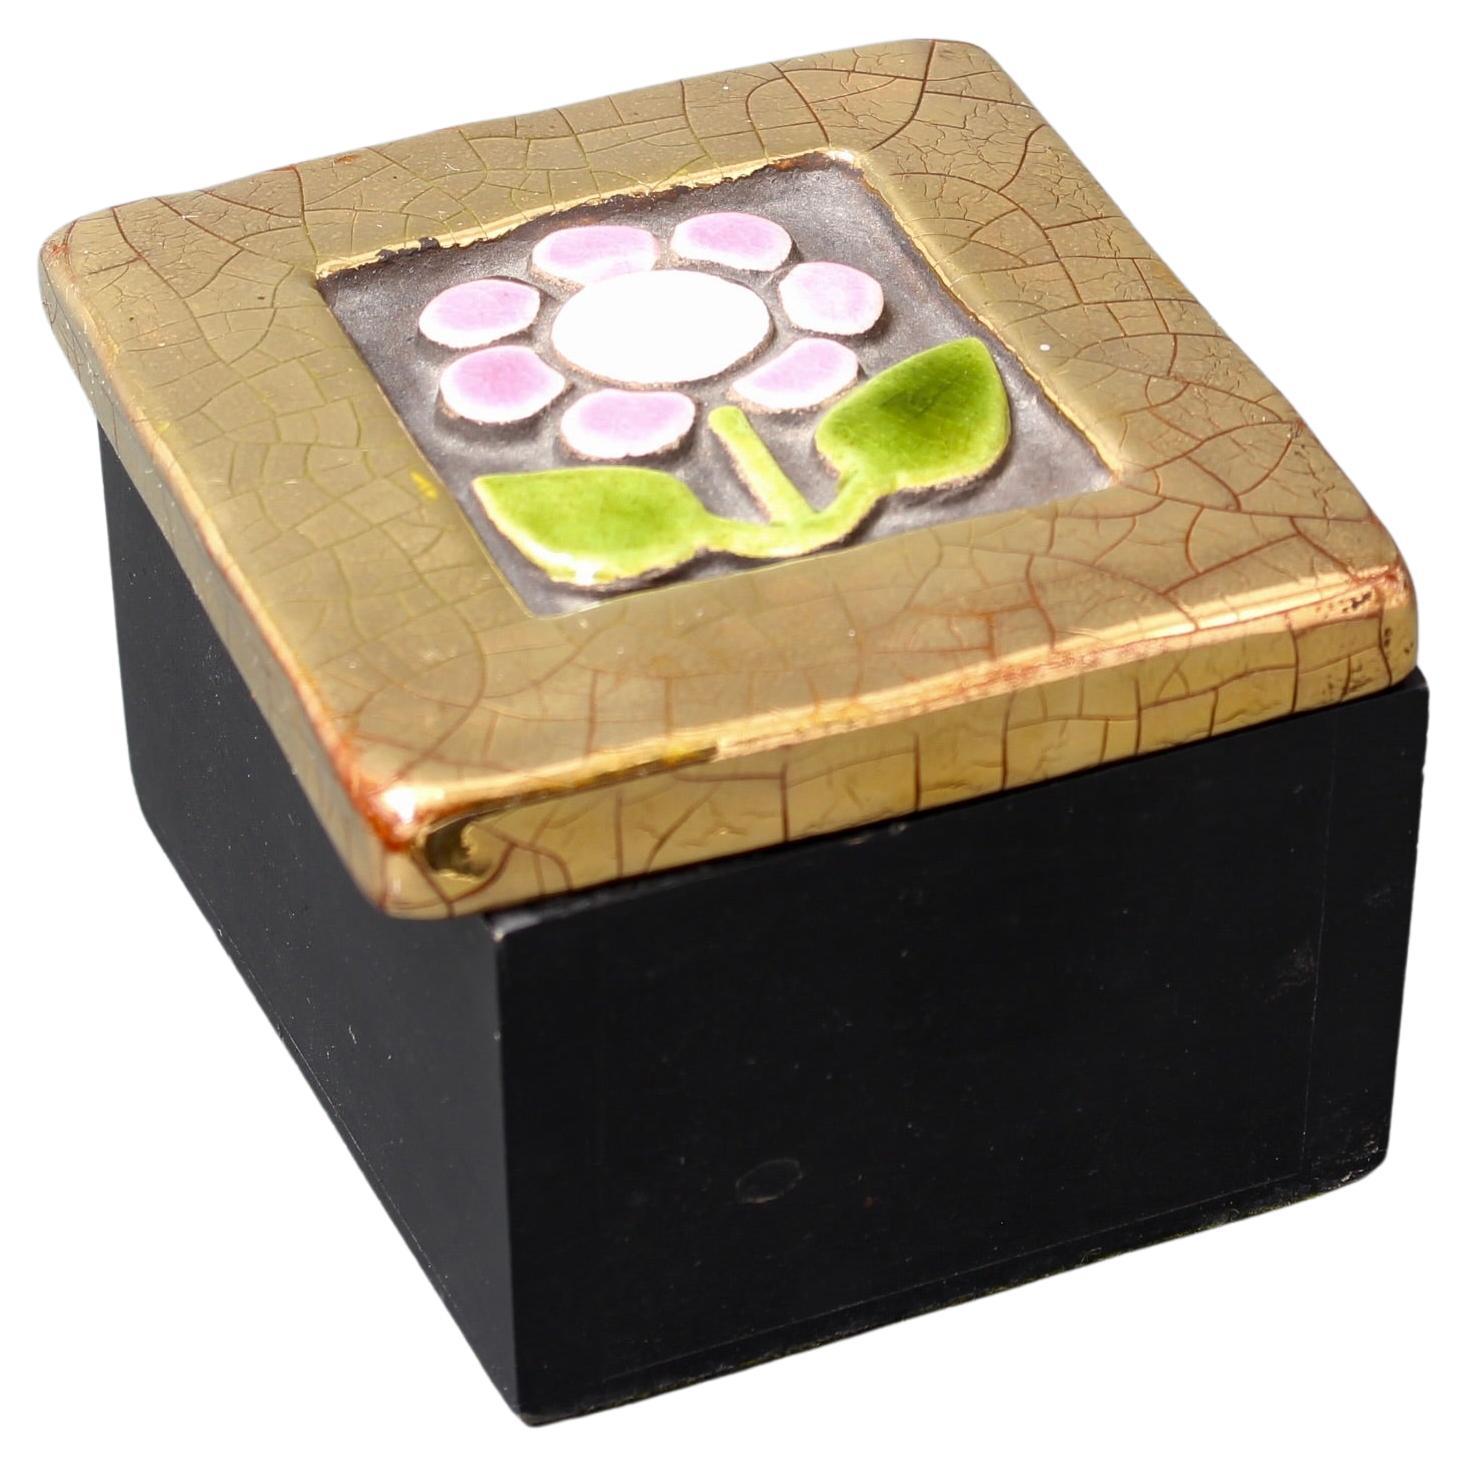 Jewellery box with decorative ceramic lid by Mithé Espelt (circa 1960s). Quaint raised sunflower motif with pink, green and white over a neutral dark base backdrop. The decorative surround is in Espelt's trademark gold crackle. The lid tops a small,